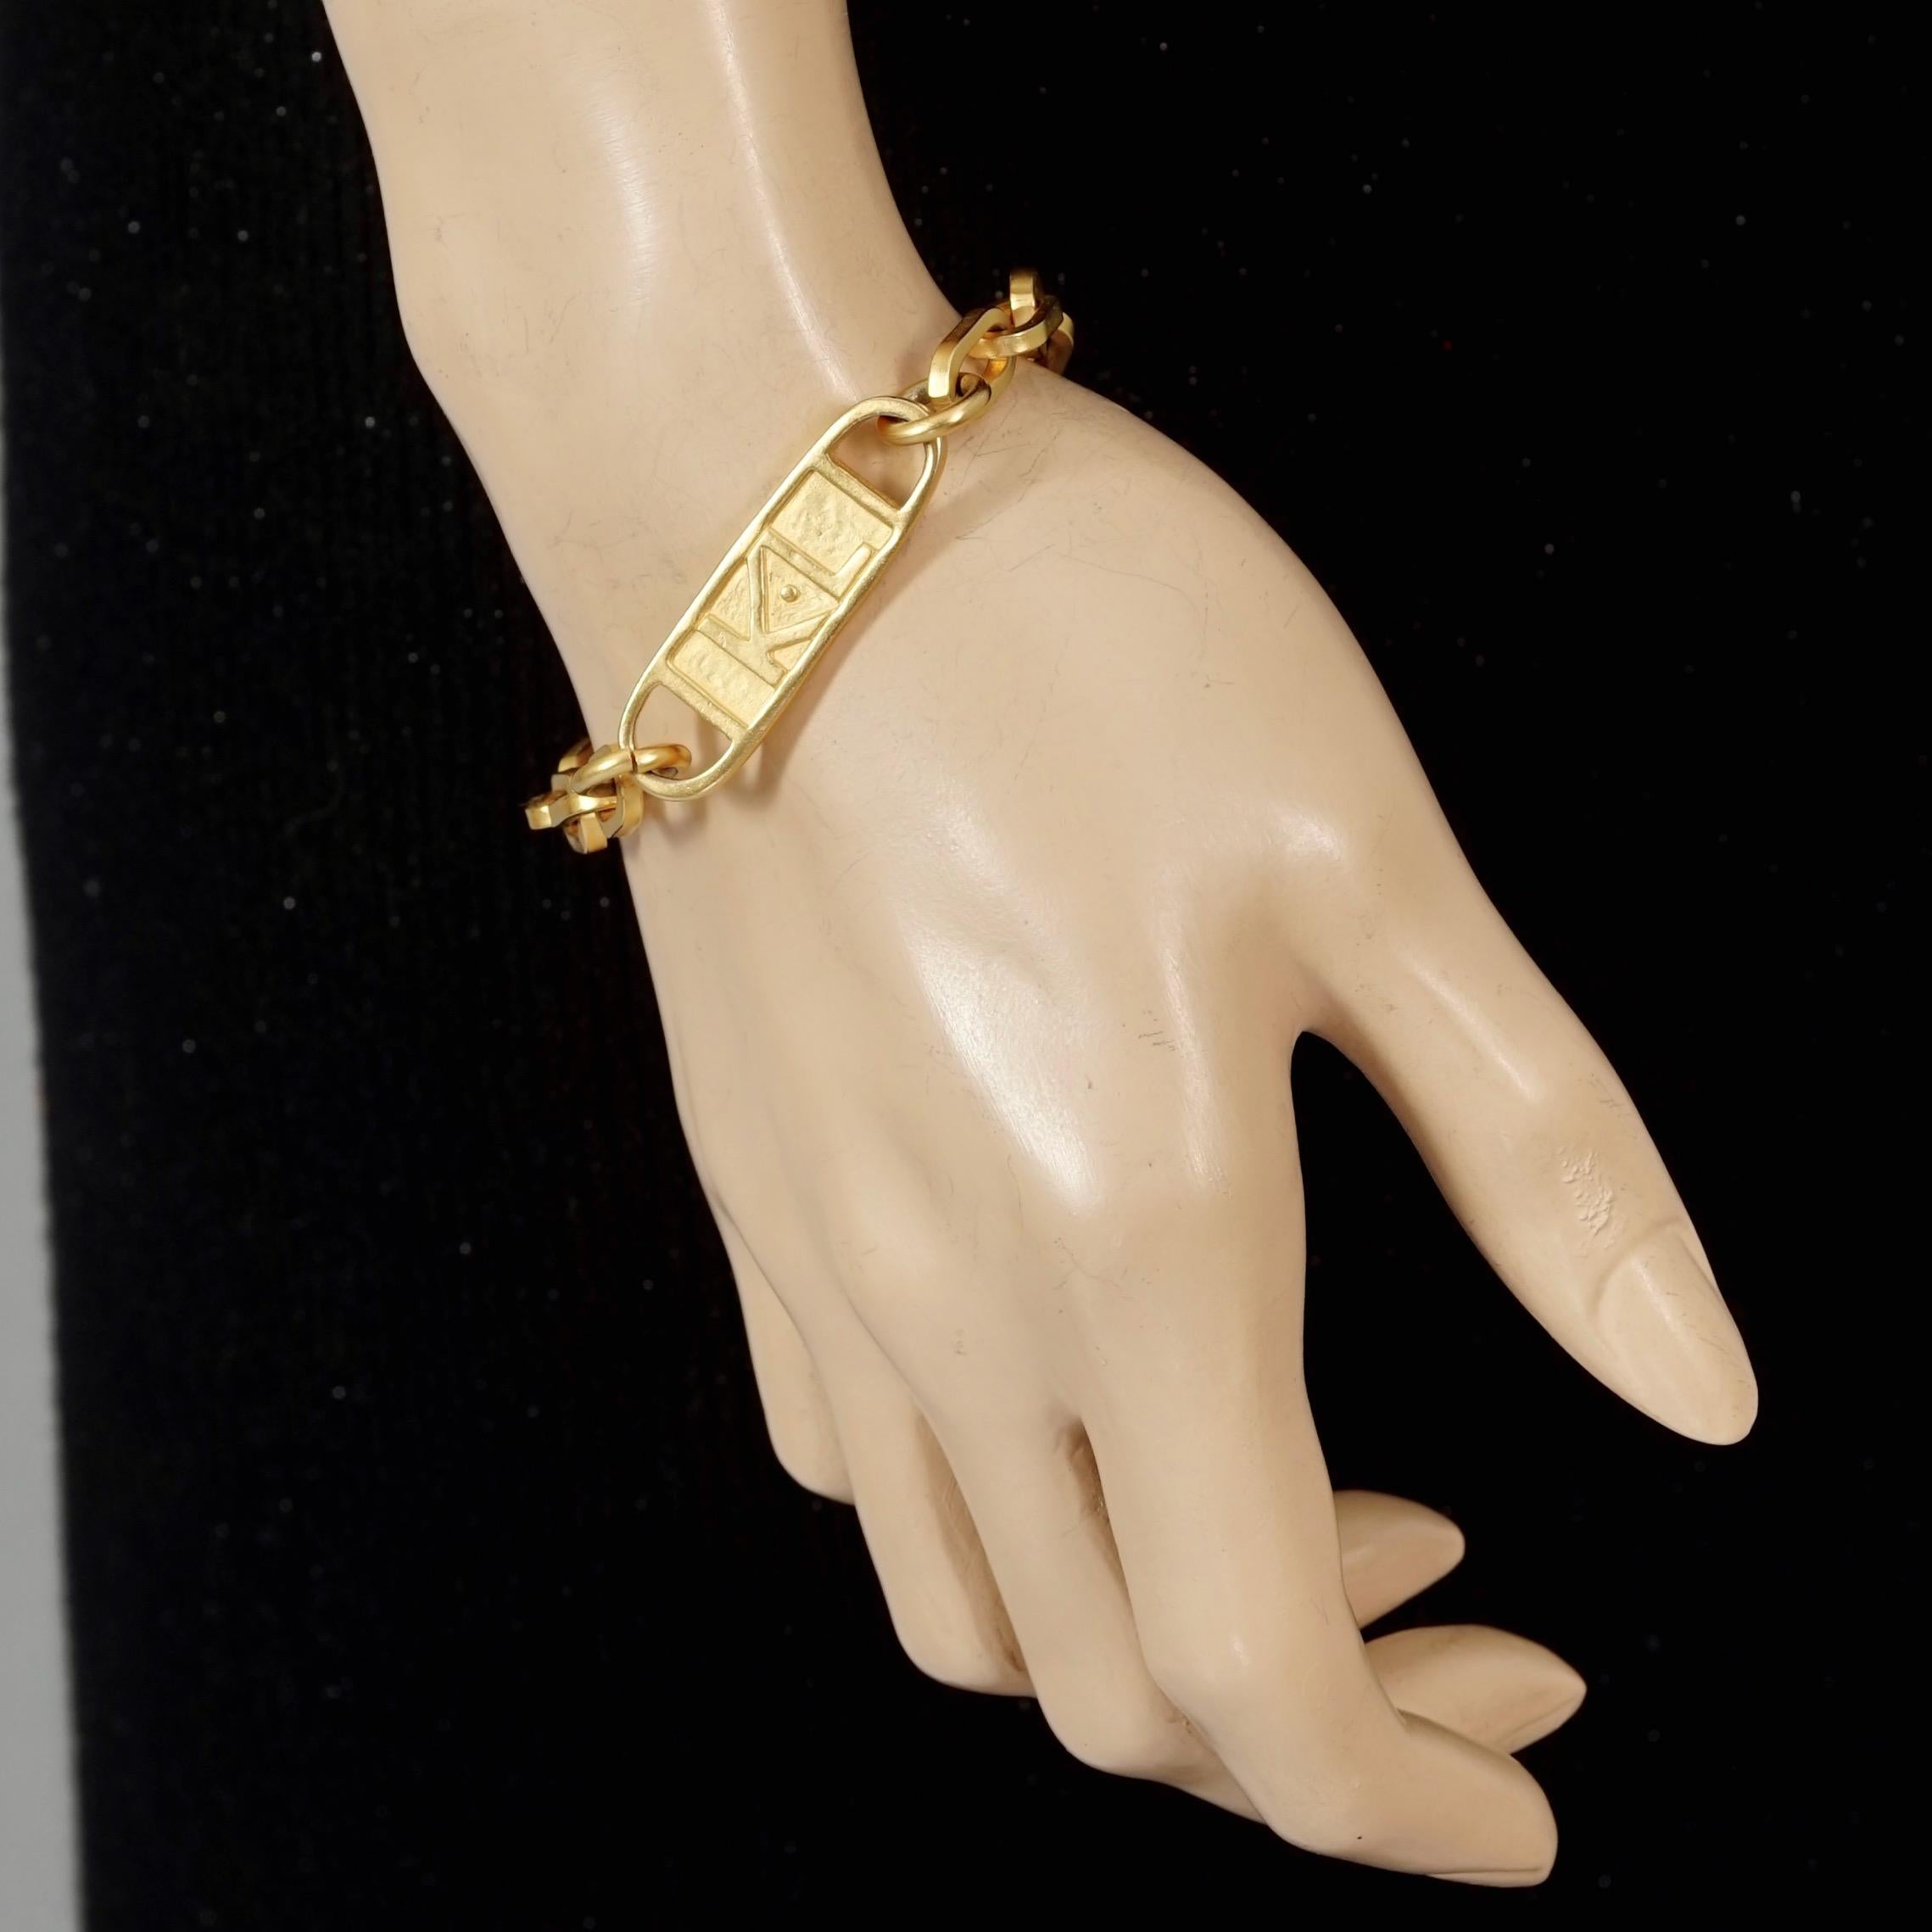 Vintage KARL LAGERFELD Logo ID Plate Chain Bracelet

Measurements:
Height: 0.47 inch (1.2 cm)
Wearable Length: 7.67 inches (19.5cm)

Features:
- 100% Authentic KARL LAGERFELD.
- Embossed KL logo on ID plate chain bracelet.
- Gold tone hardware.
-